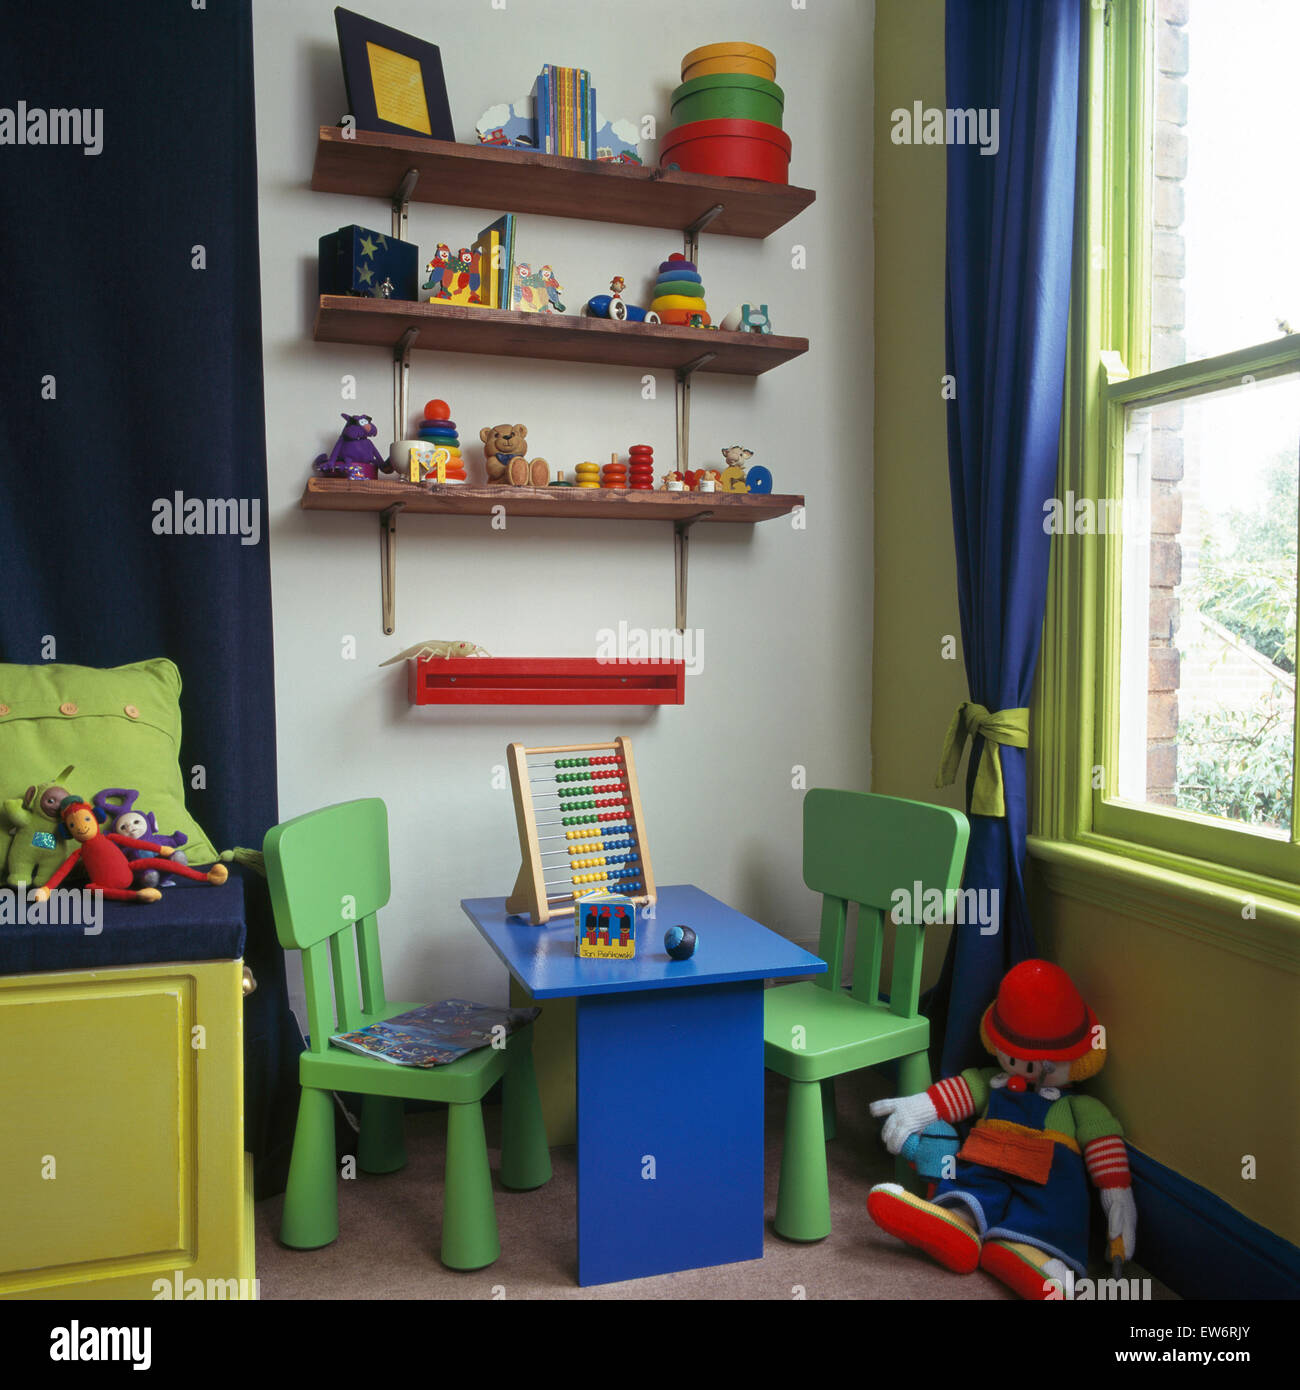 Toys On Shelves Above Child Sized Colorful Table And Chairs In